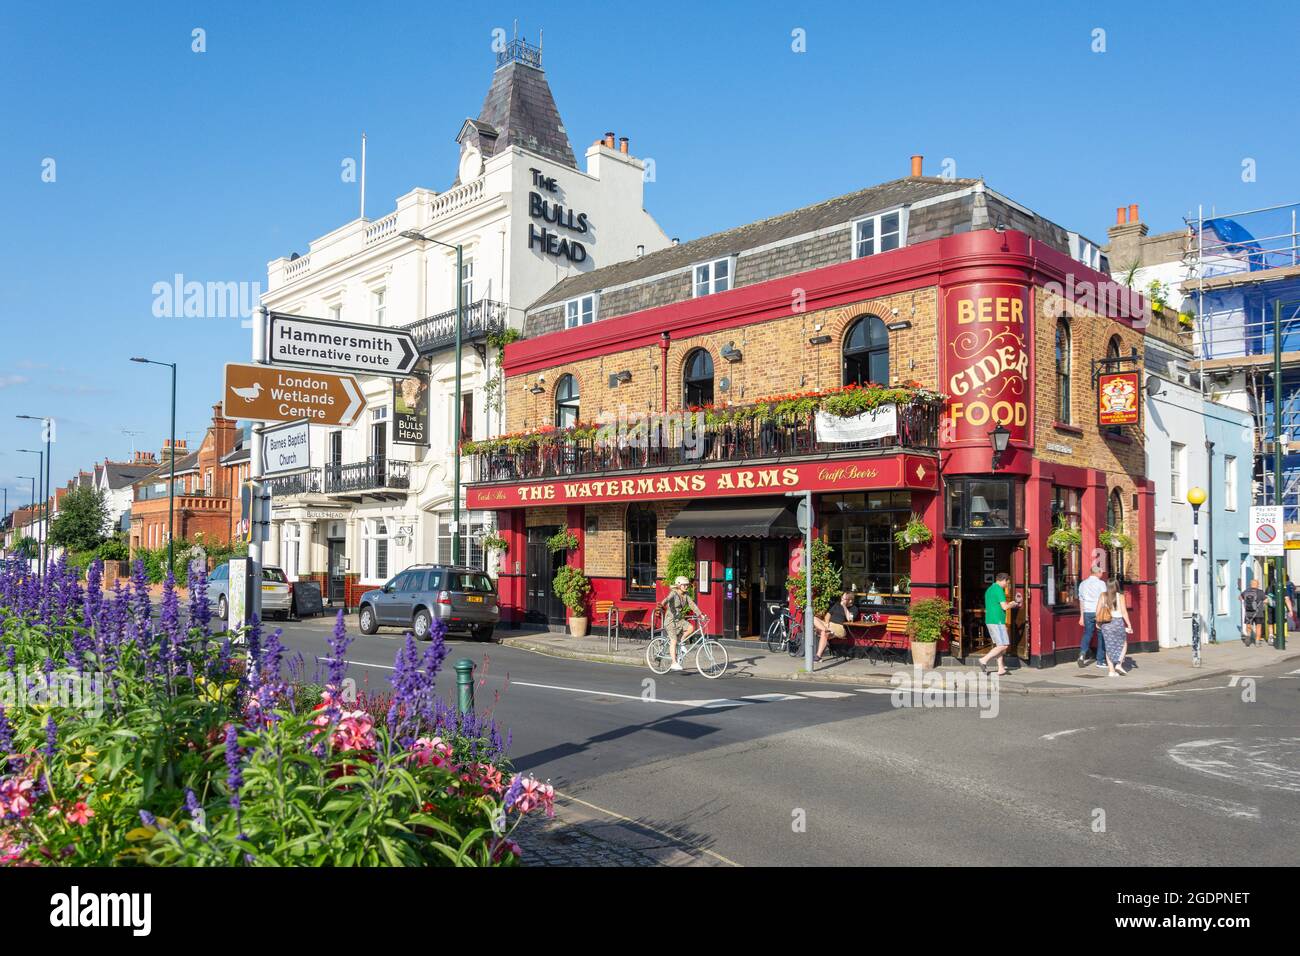 The Bulls Head & Watermans Arms, Lonsdale Road, Barnes, London Borough of Richmond upon Thames, Greater London, England, United Kingdom Stock Photo